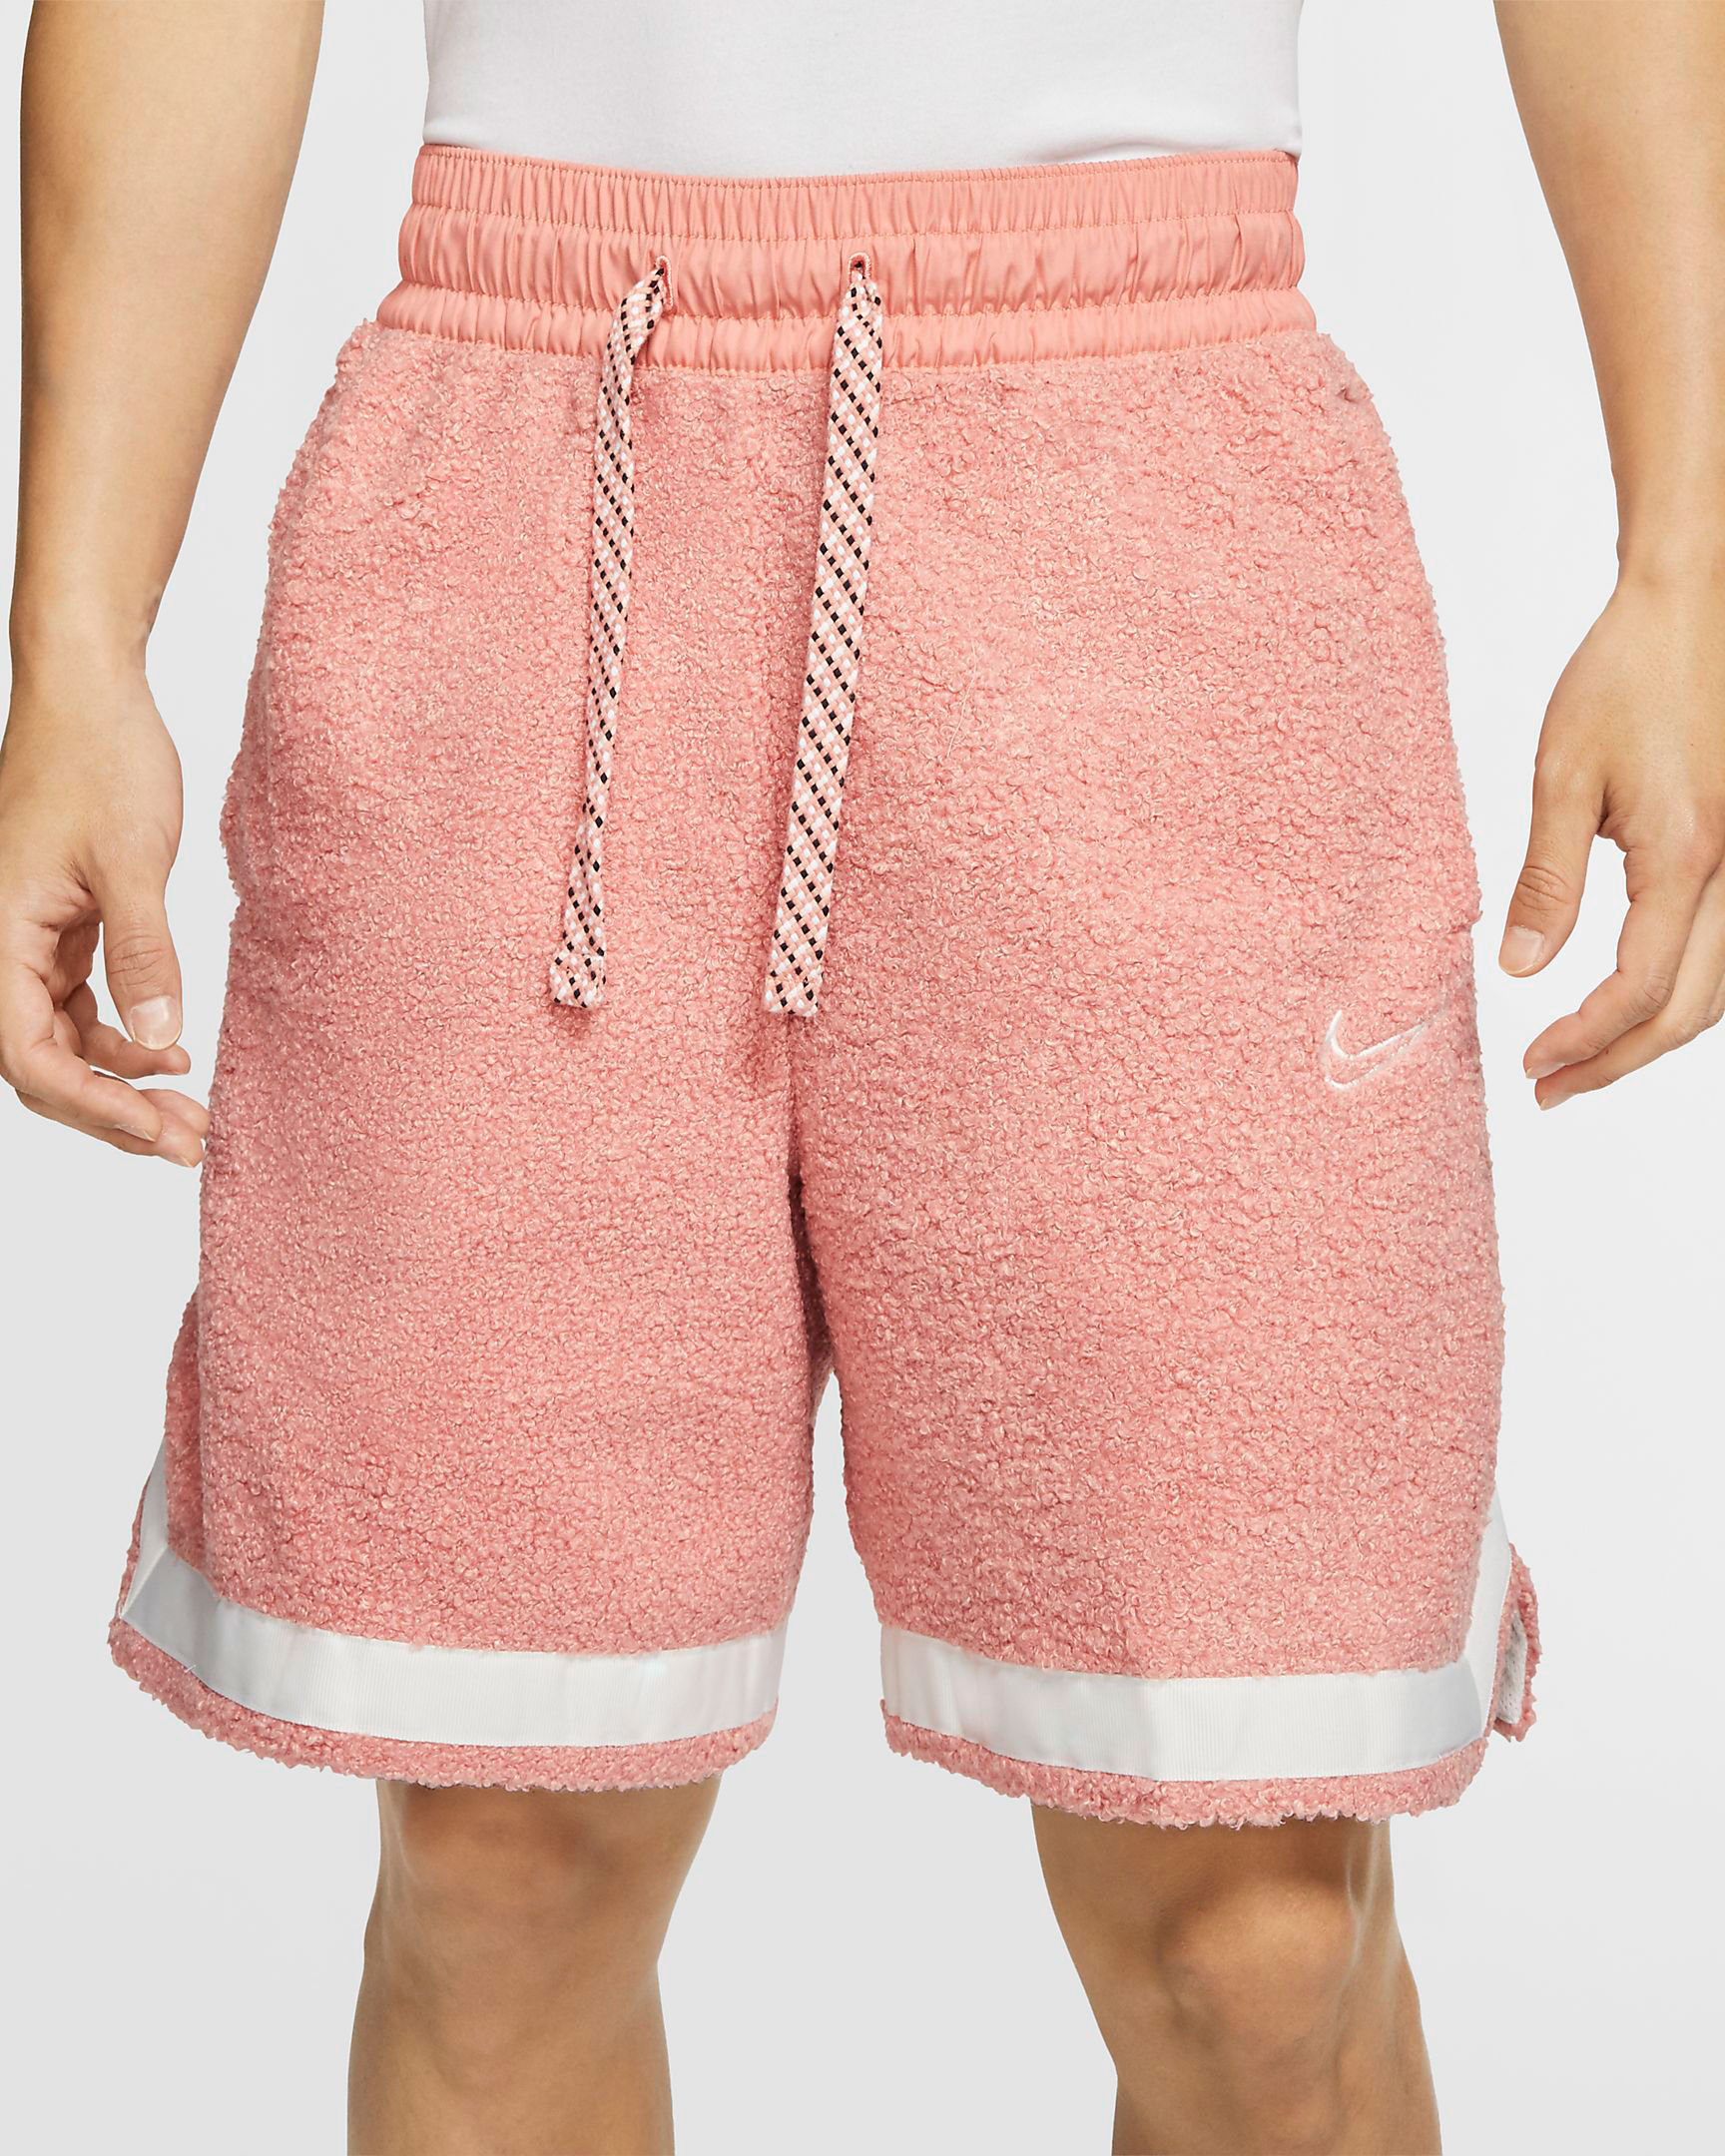 nike-kd-12-aunt-pearl-shorts-match-2